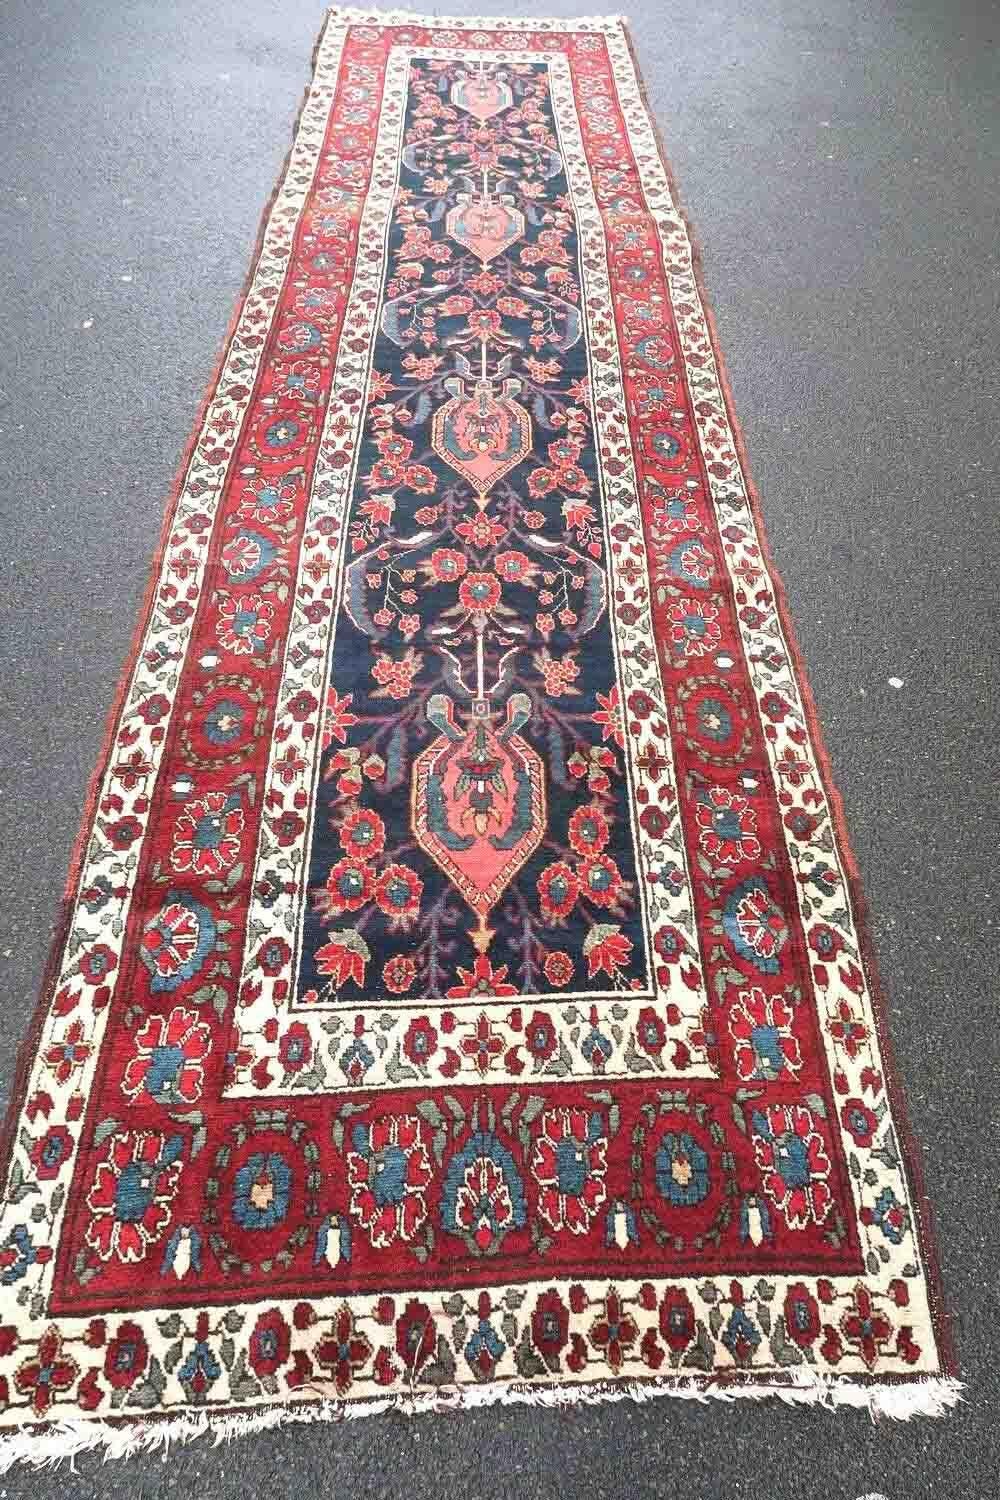 Handmade antique runner from North West in floral design and vegetable dyes. The rug is from the beginning of 20th century in original good condition.

-condition: original good,

-circa: 1900s,

-size: 3.5' x 13.7' (107cm x